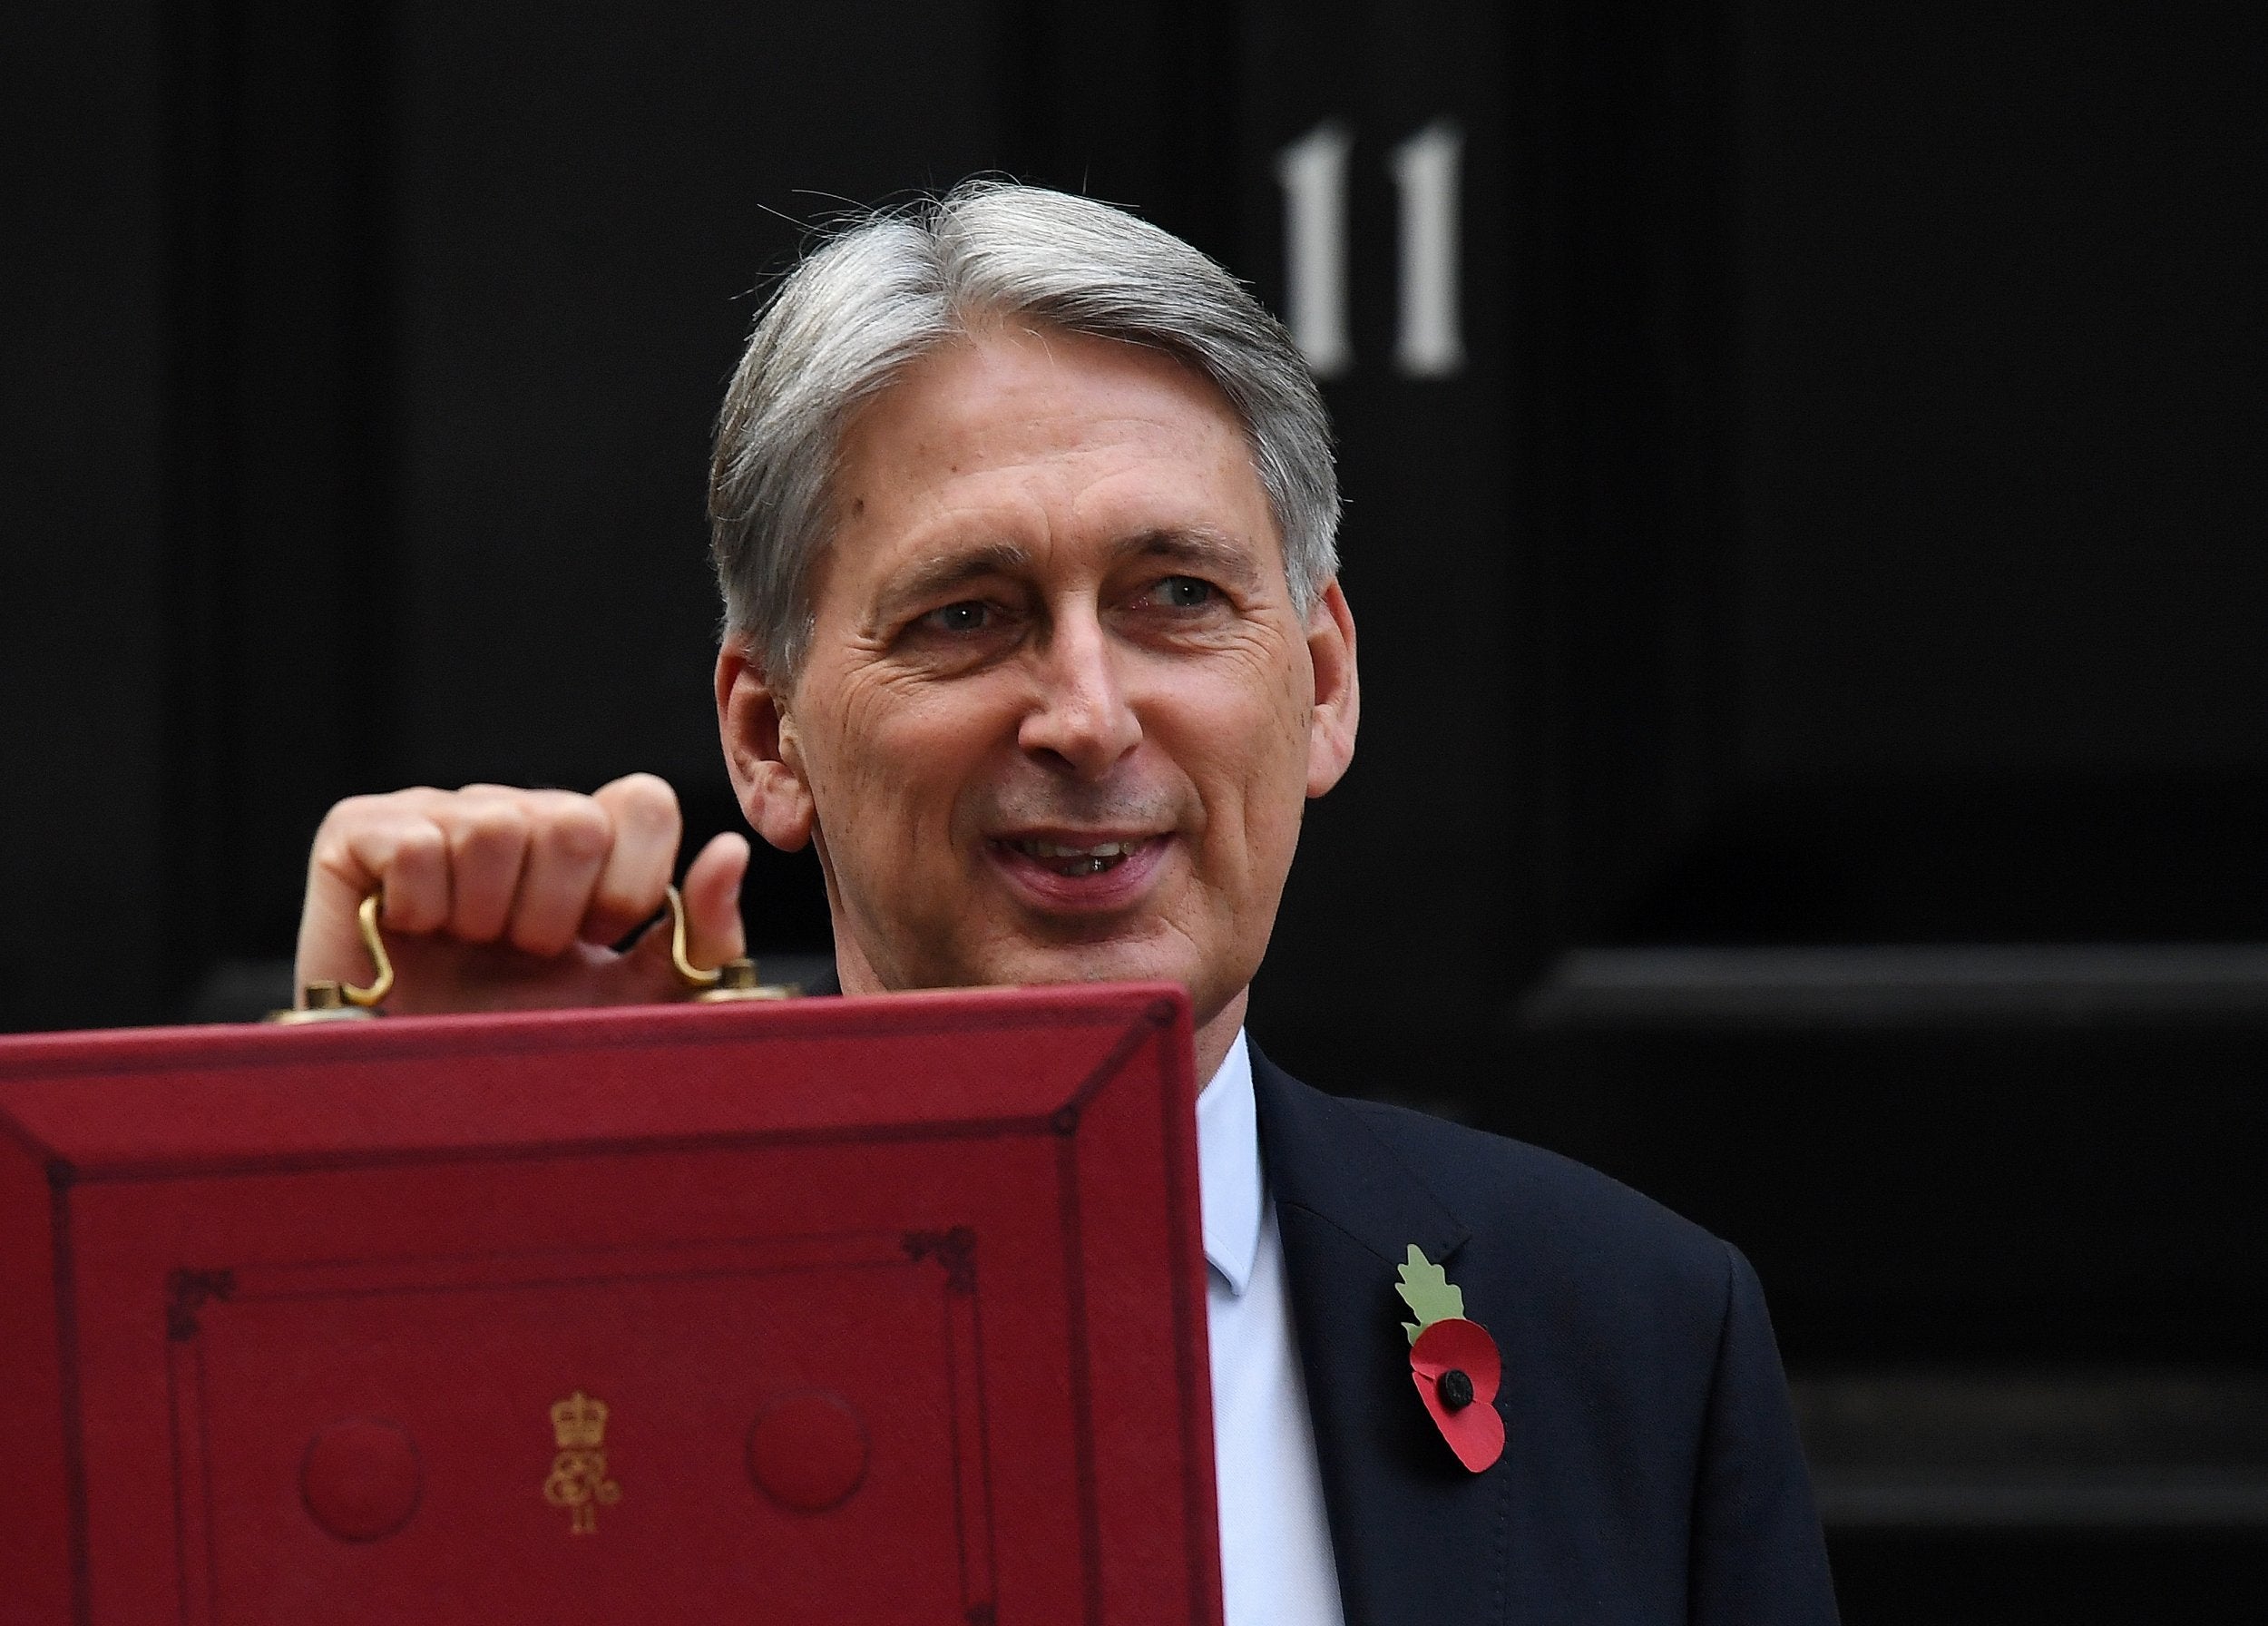 To meet these figures, Philip Hammond would have to nearly double the basic rate of income tax